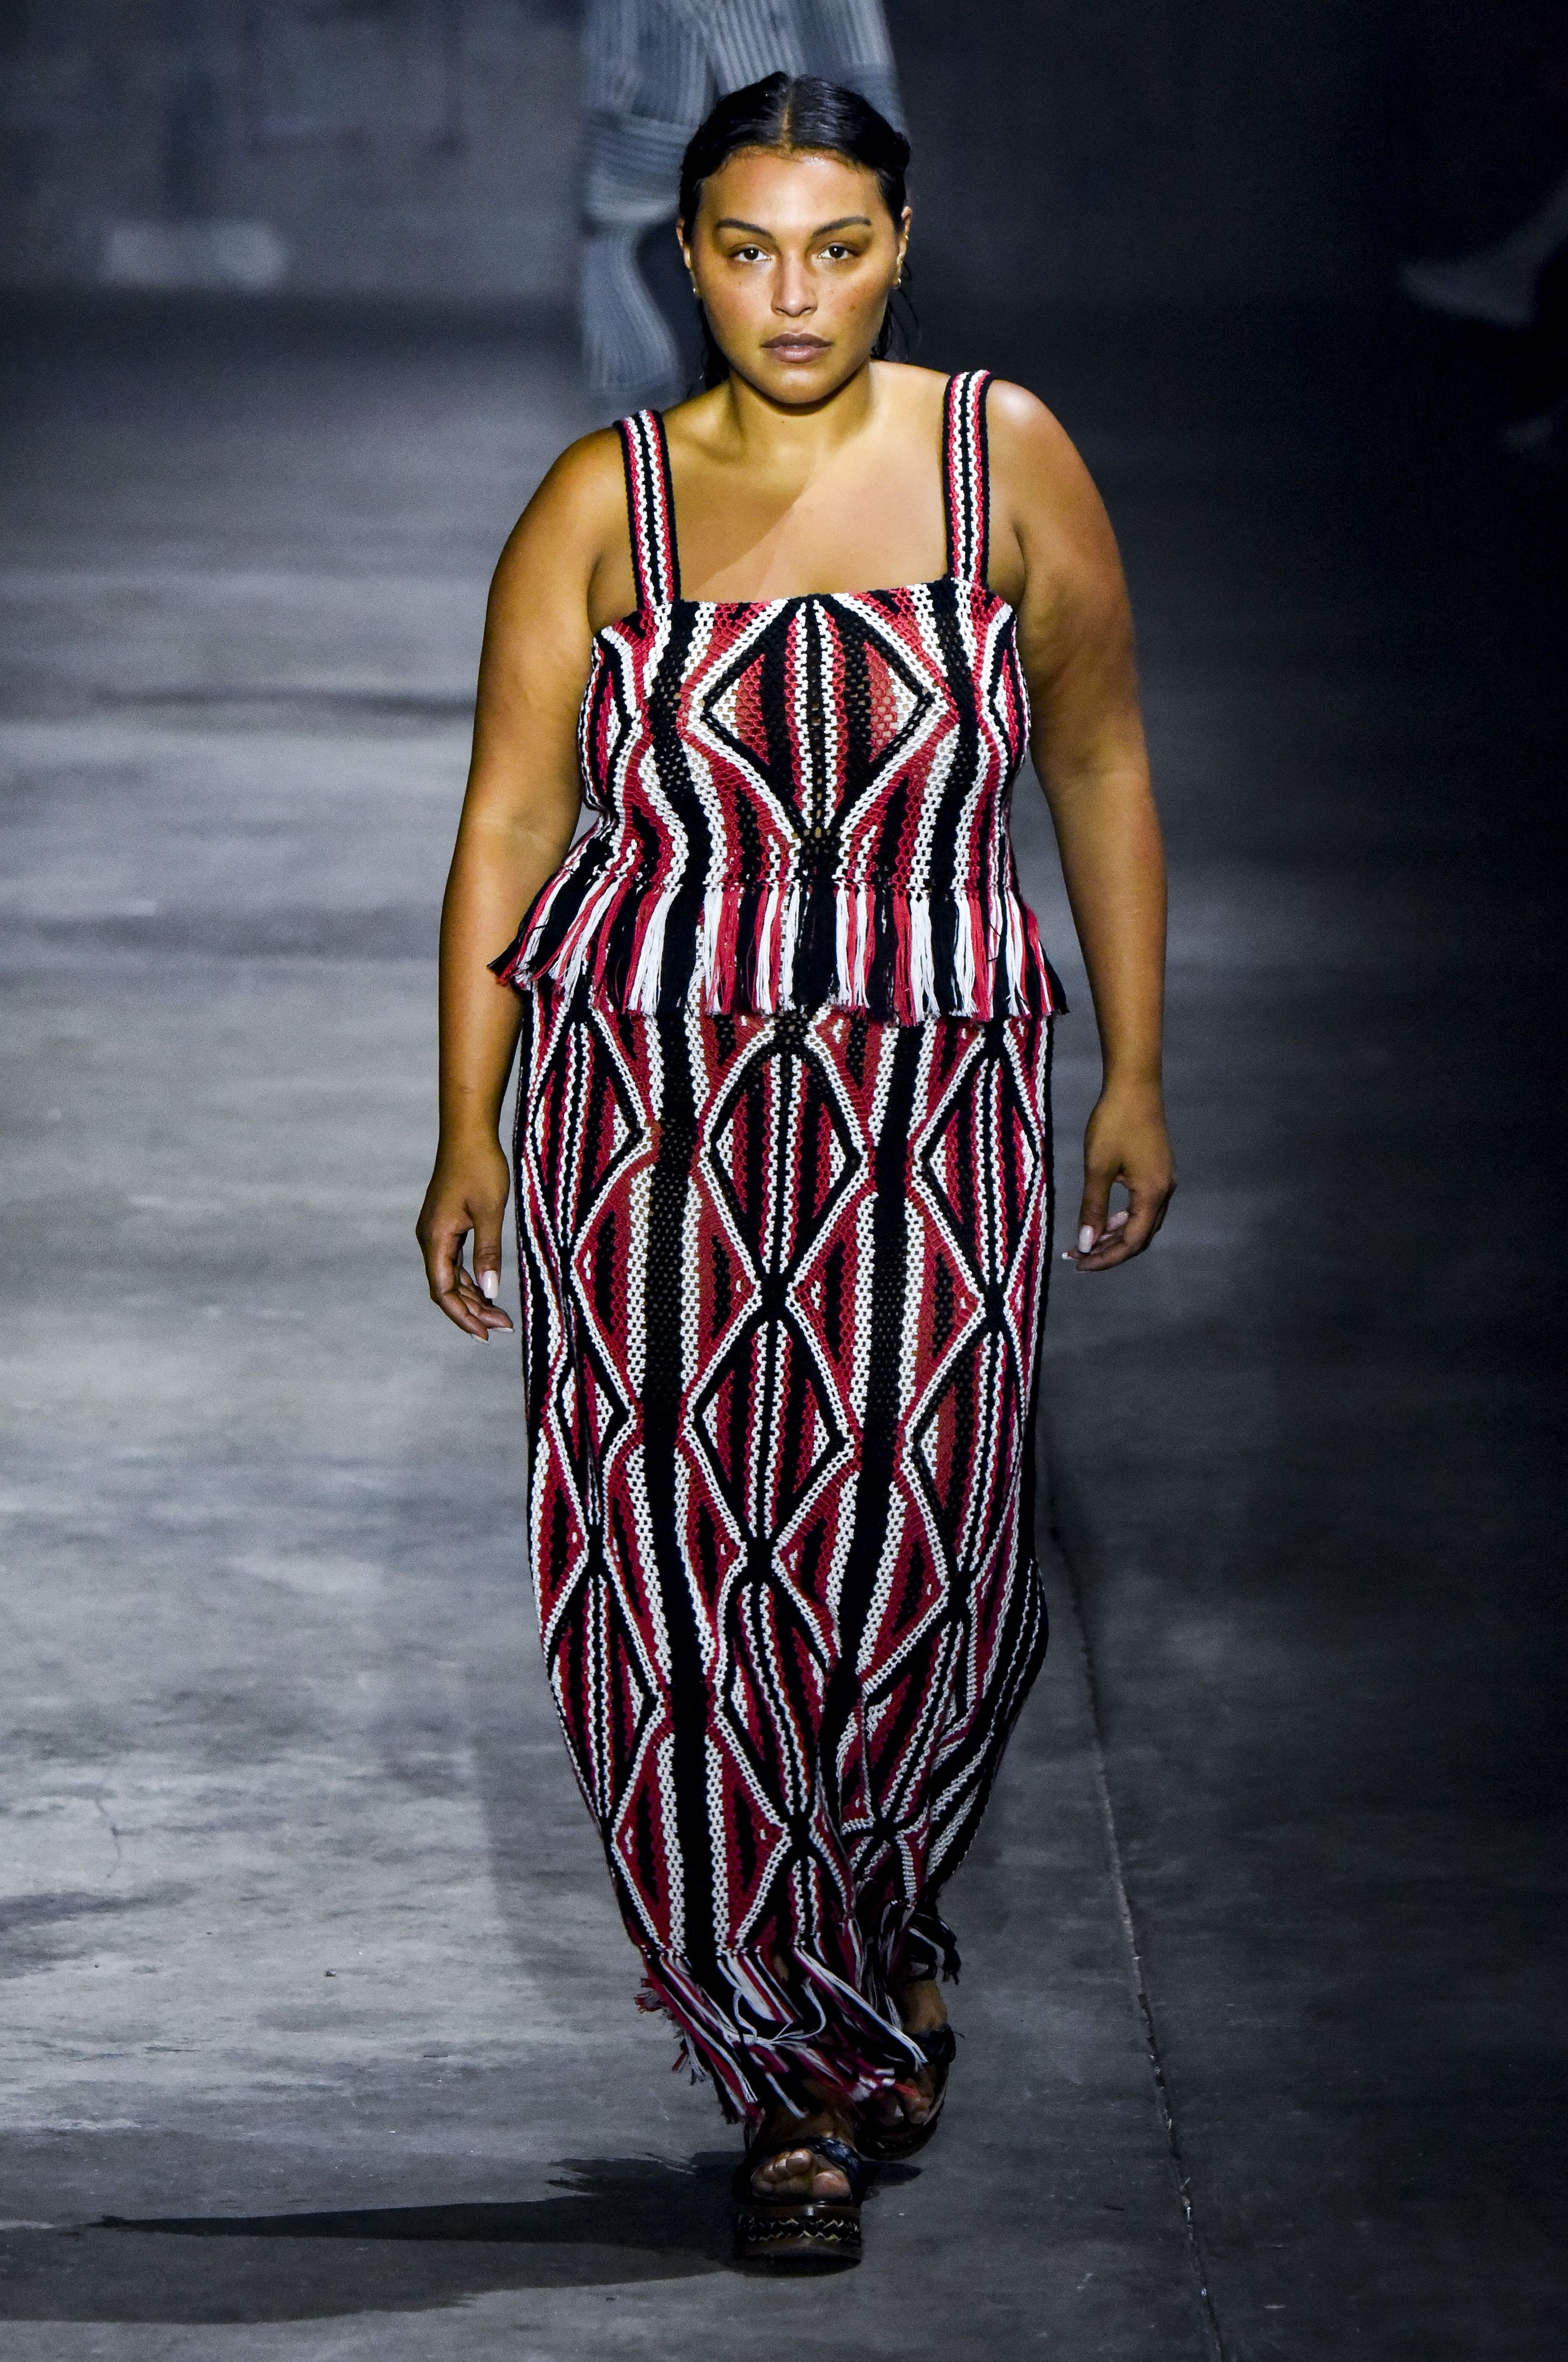 plus size summer fashion trends 2022